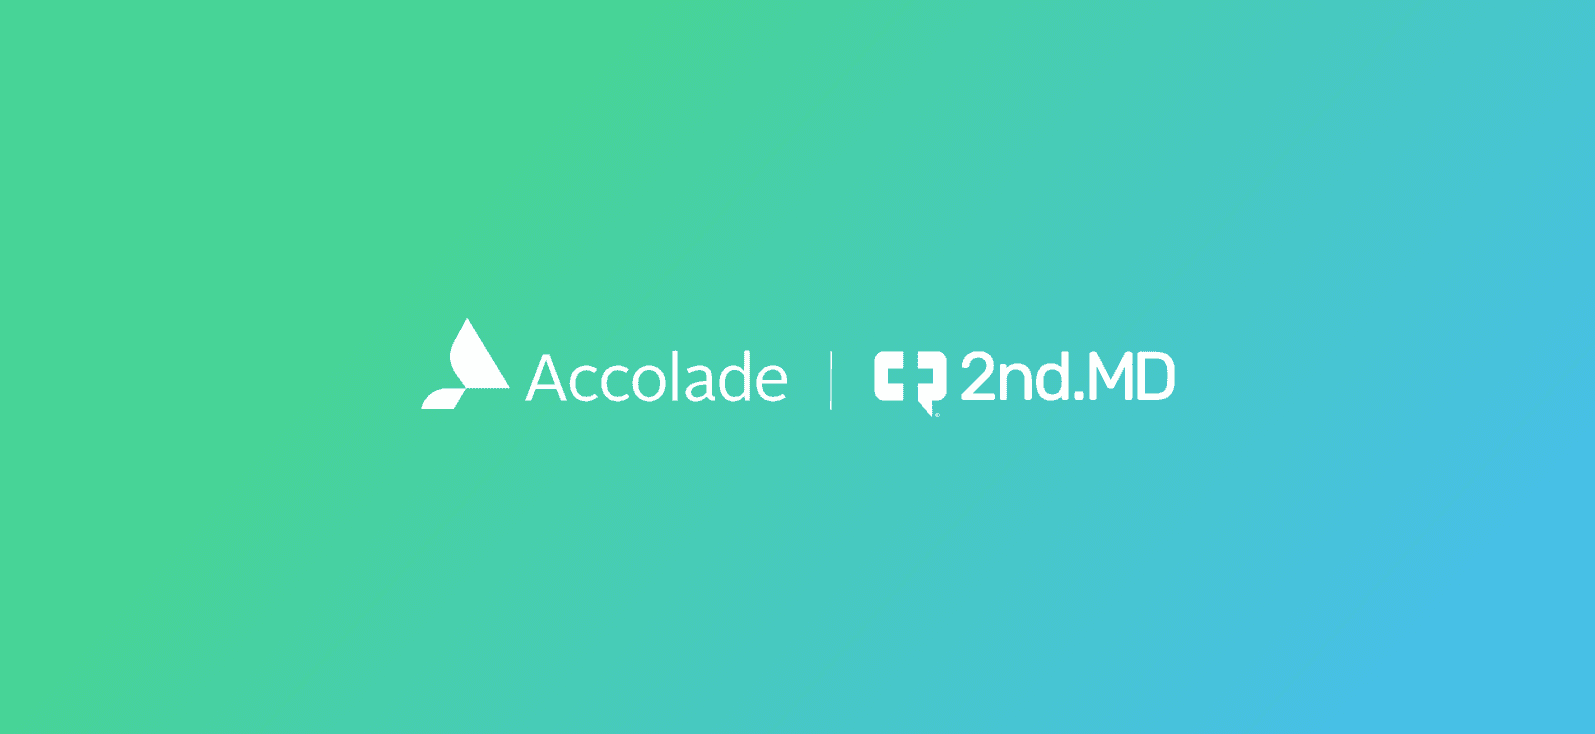 Accolade and 2nd.MD logos